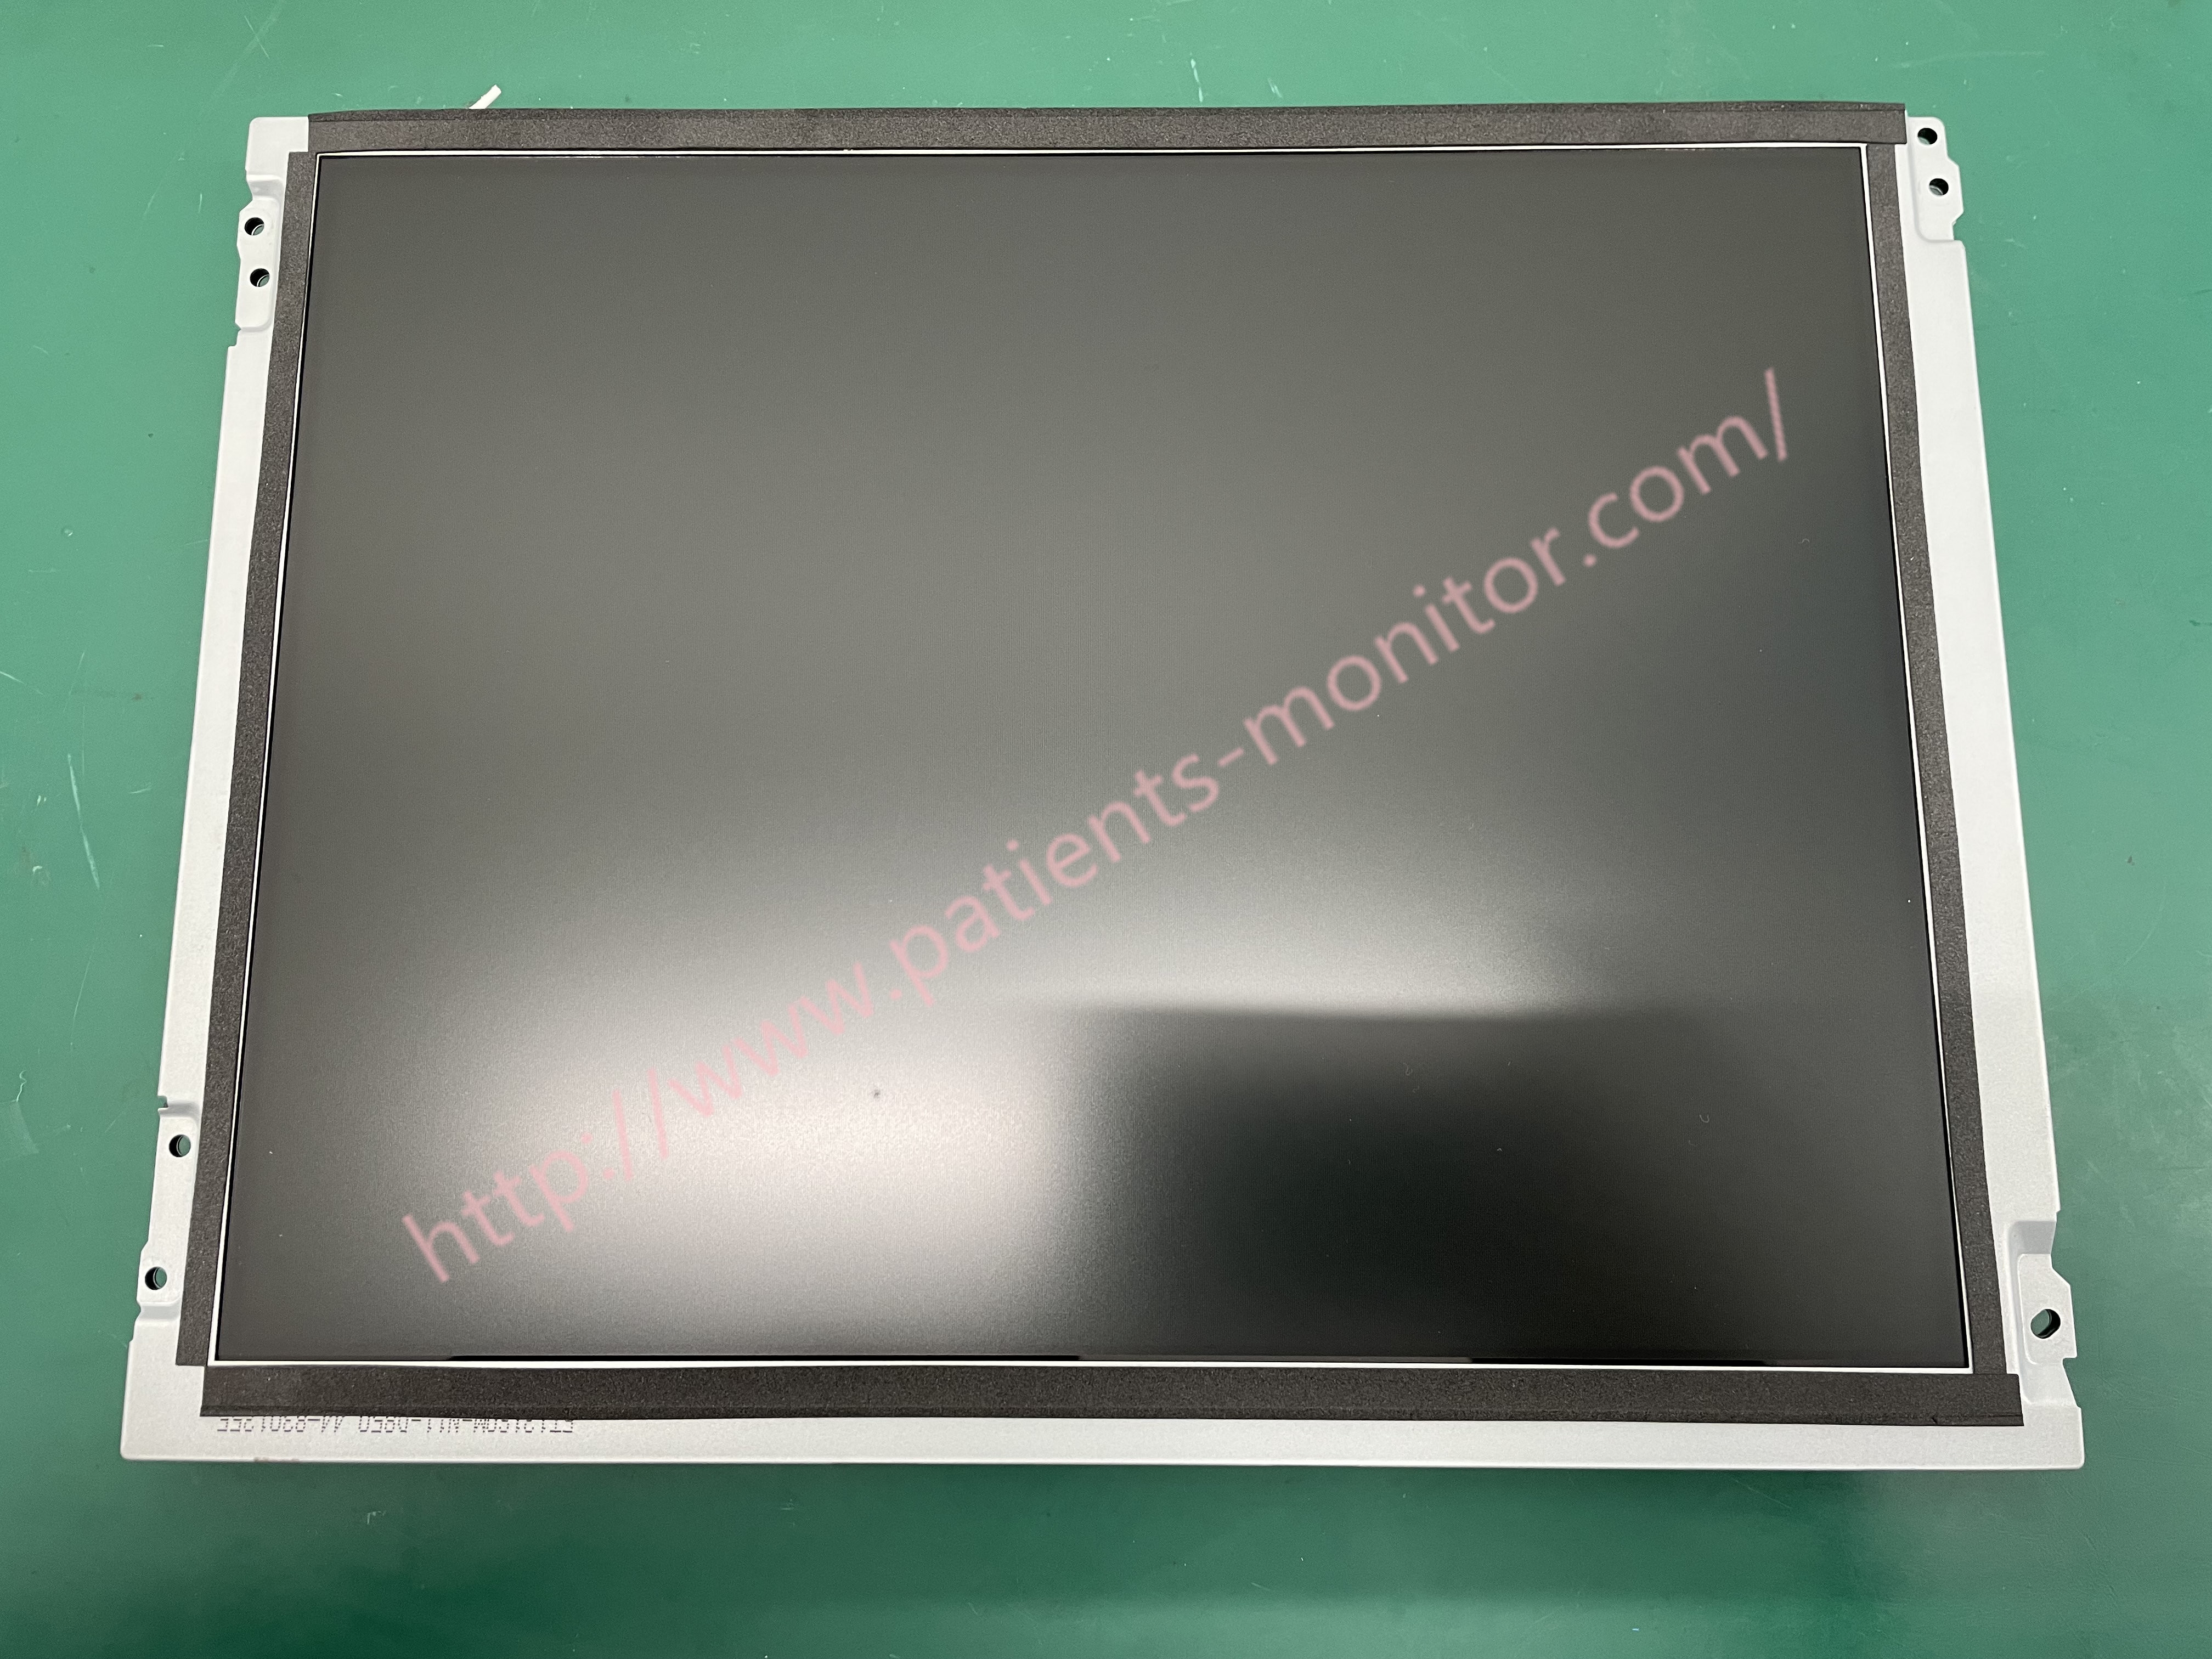  Edan IM70 Patient Monitior 12.1inch Display With Touch Screen BOE BA121S01-200 Manufactures